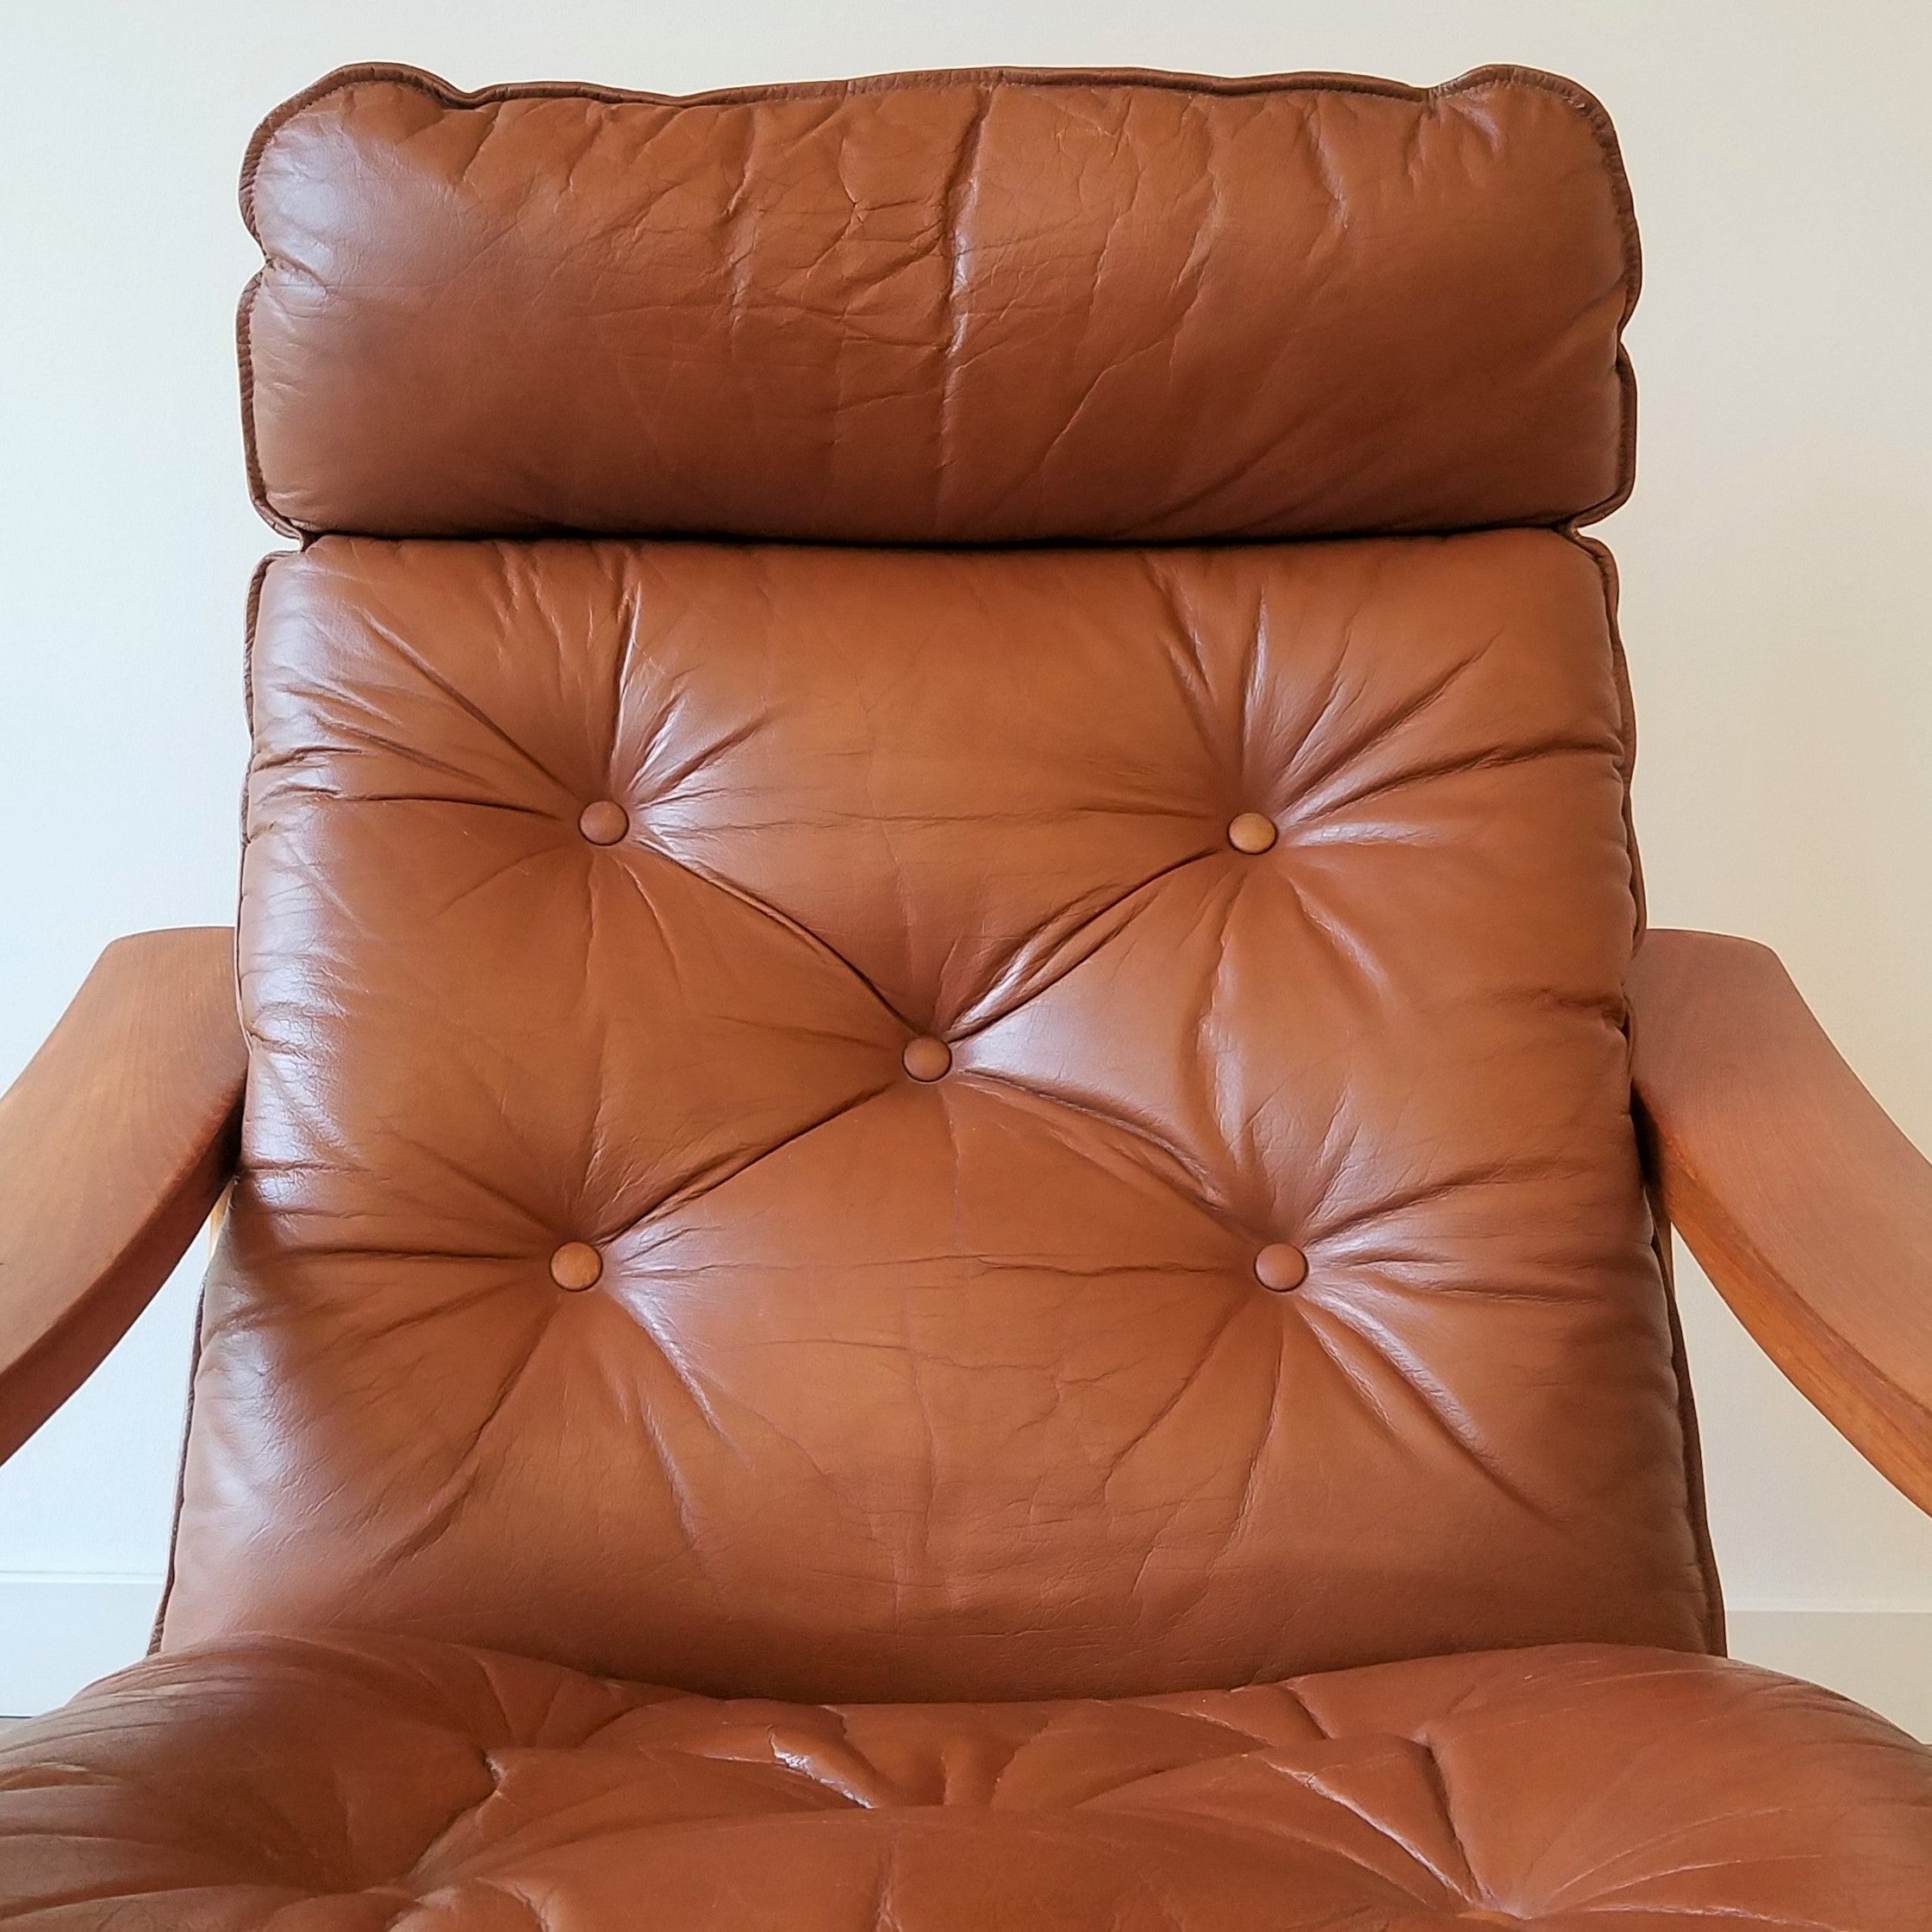 Lied Mobler Leather Swivel Recliner with Ottoman